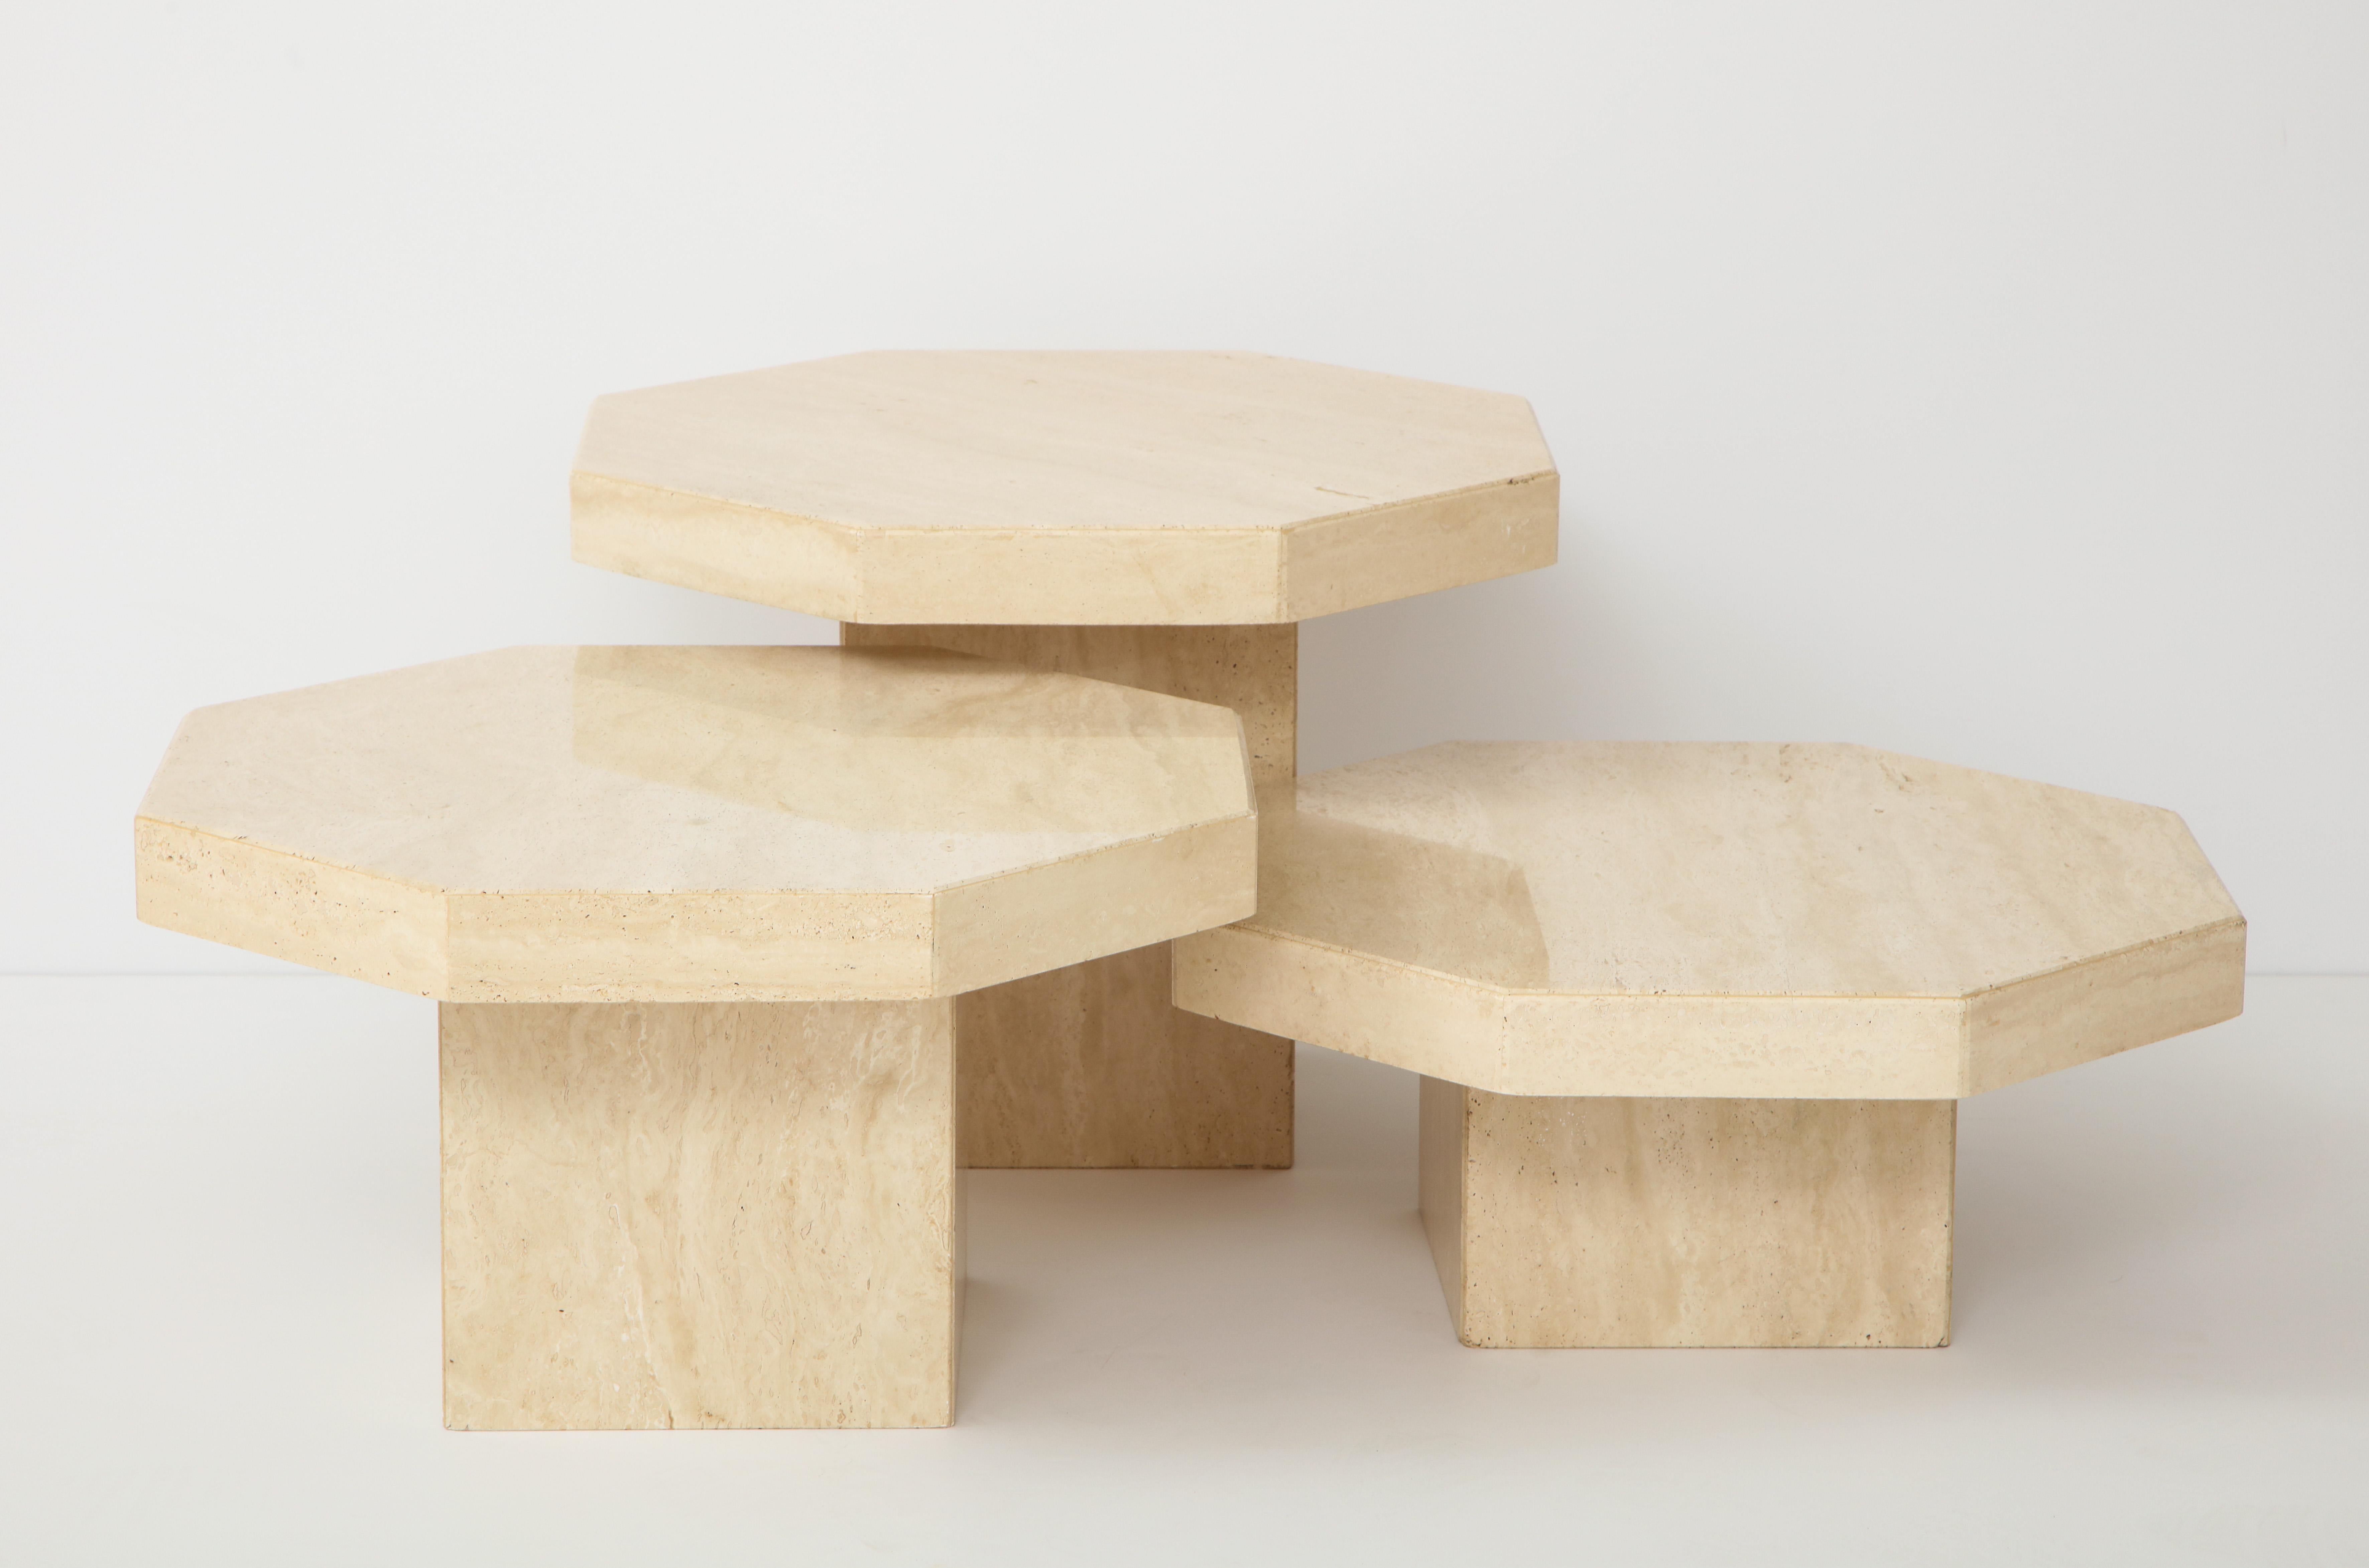 Set of three 1970s Italian travertine nesting tables.
The octagonal polished tops are All the same size
with the bases varying in height so that they can be arranged in various configurations.
Tallest 15